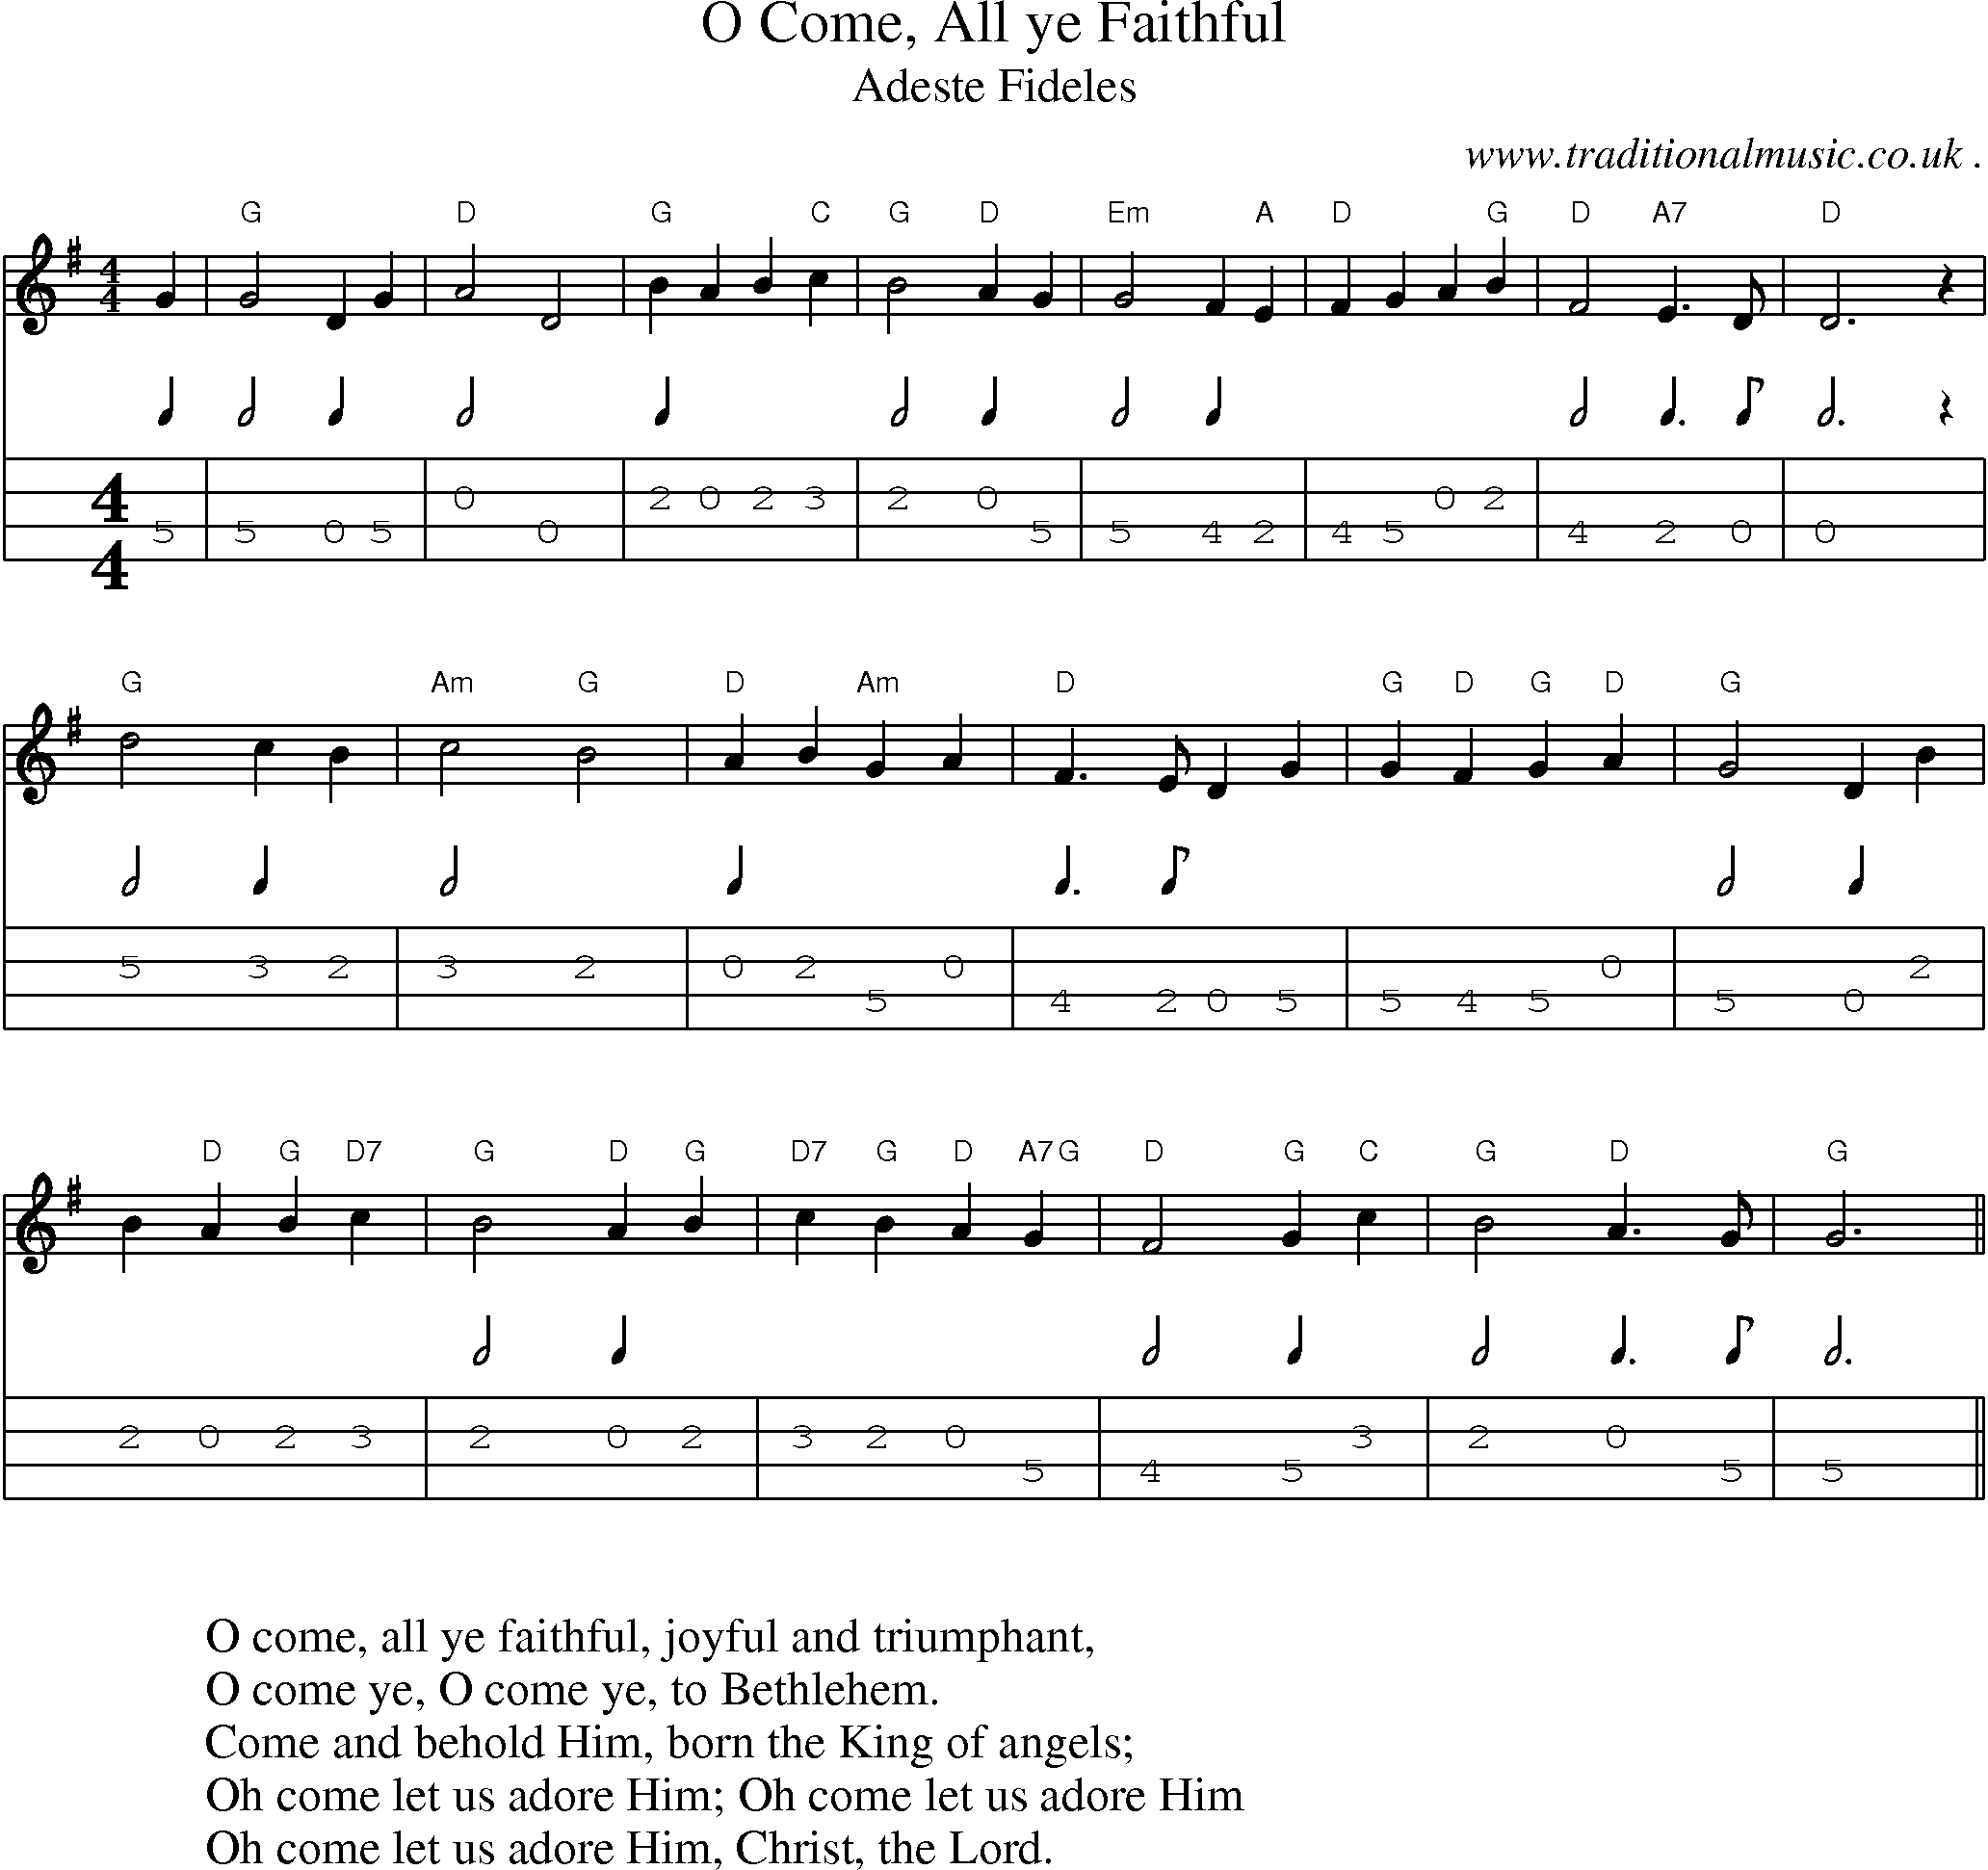 Music Score and Guitar Tabs for O Come All ye Faithful